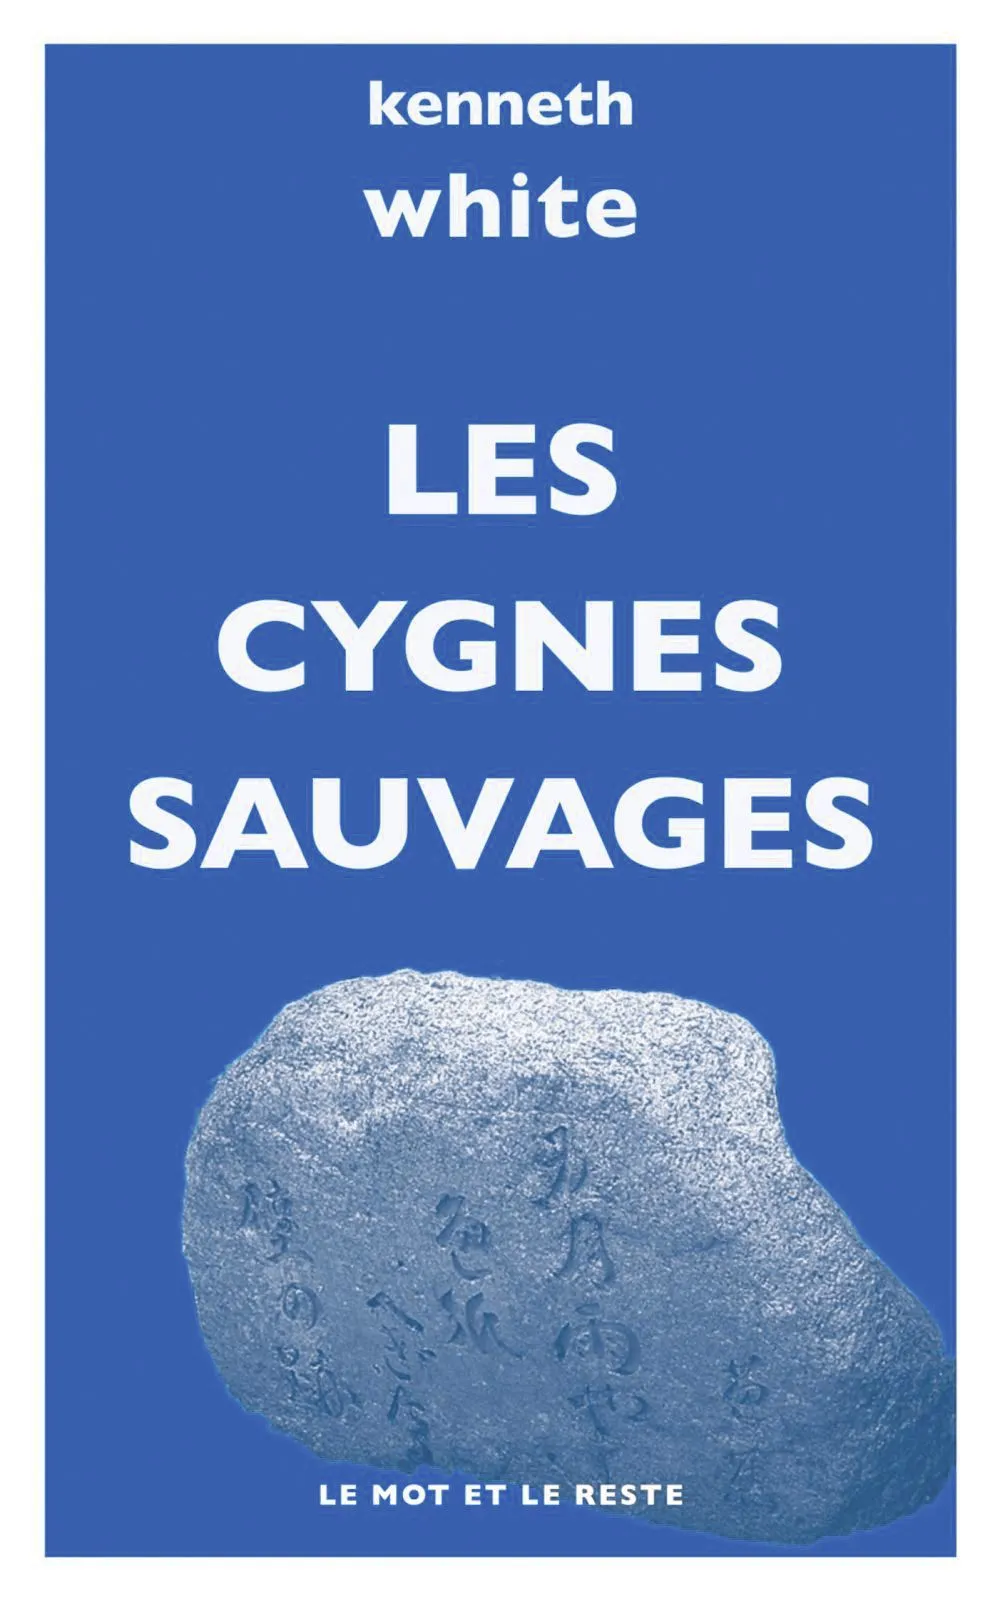 Kenneth White
Les Cygnes sauvages